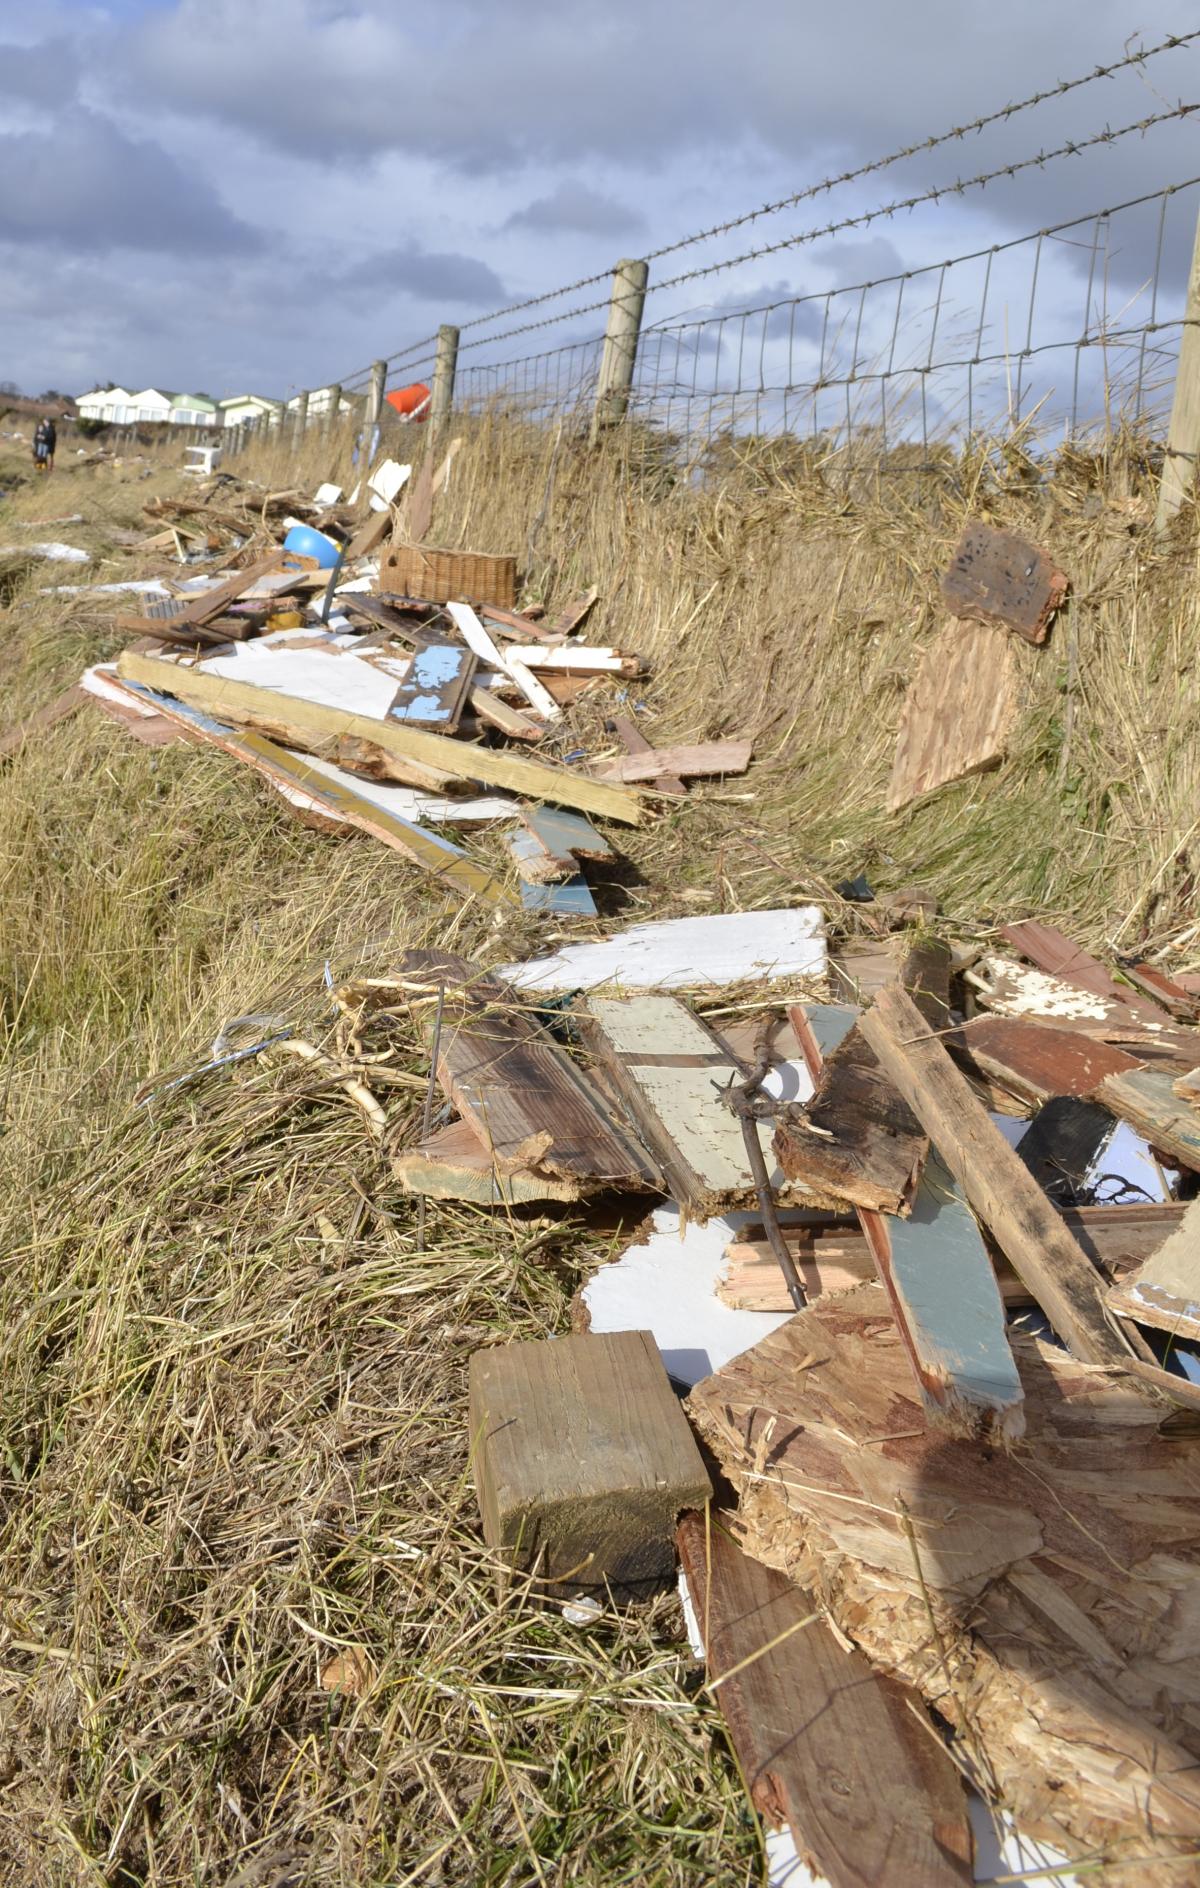 Daily Echo reader photos of the storm and damage left behind after severe weather swept through Dorset on February 14 and February 15. Picture by Gina Butler at Milford on Sea